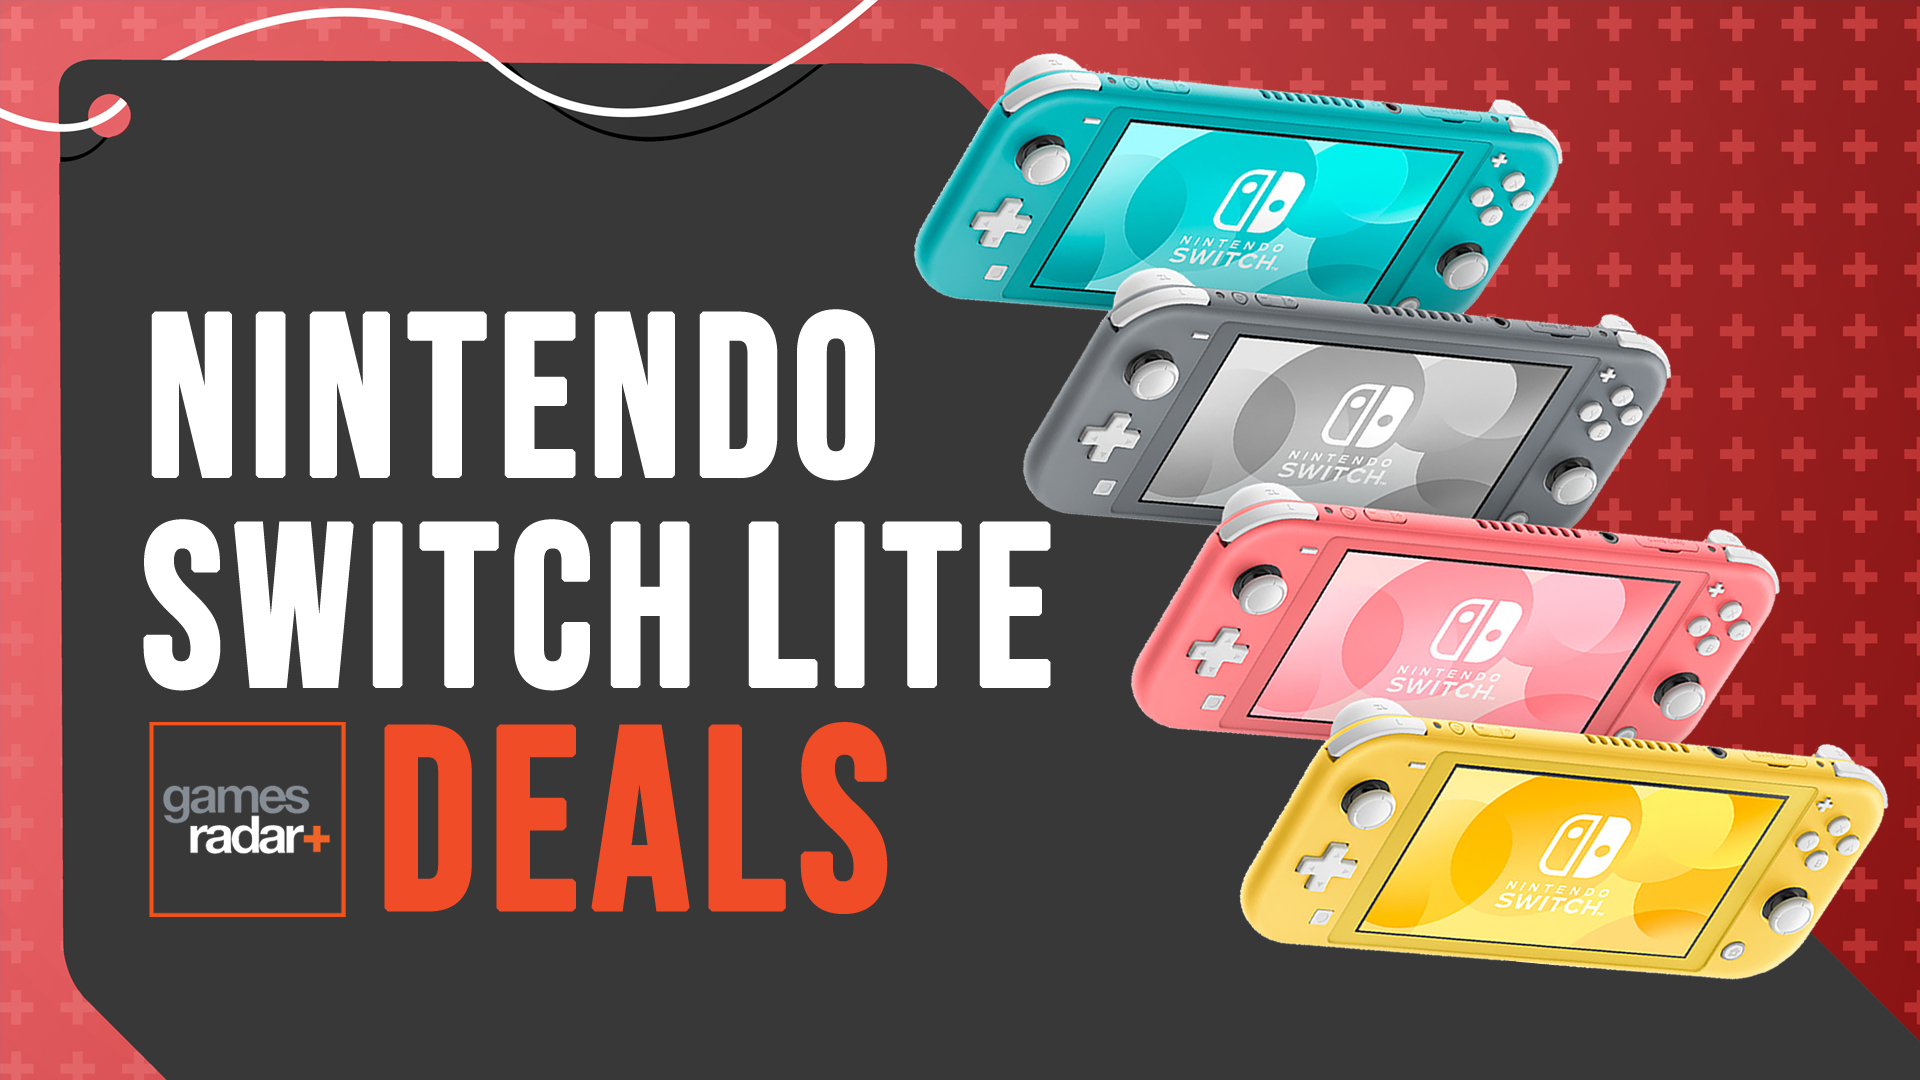 The cheapest Nintendo Switch Lite bundles, prices, and deals in April 2022